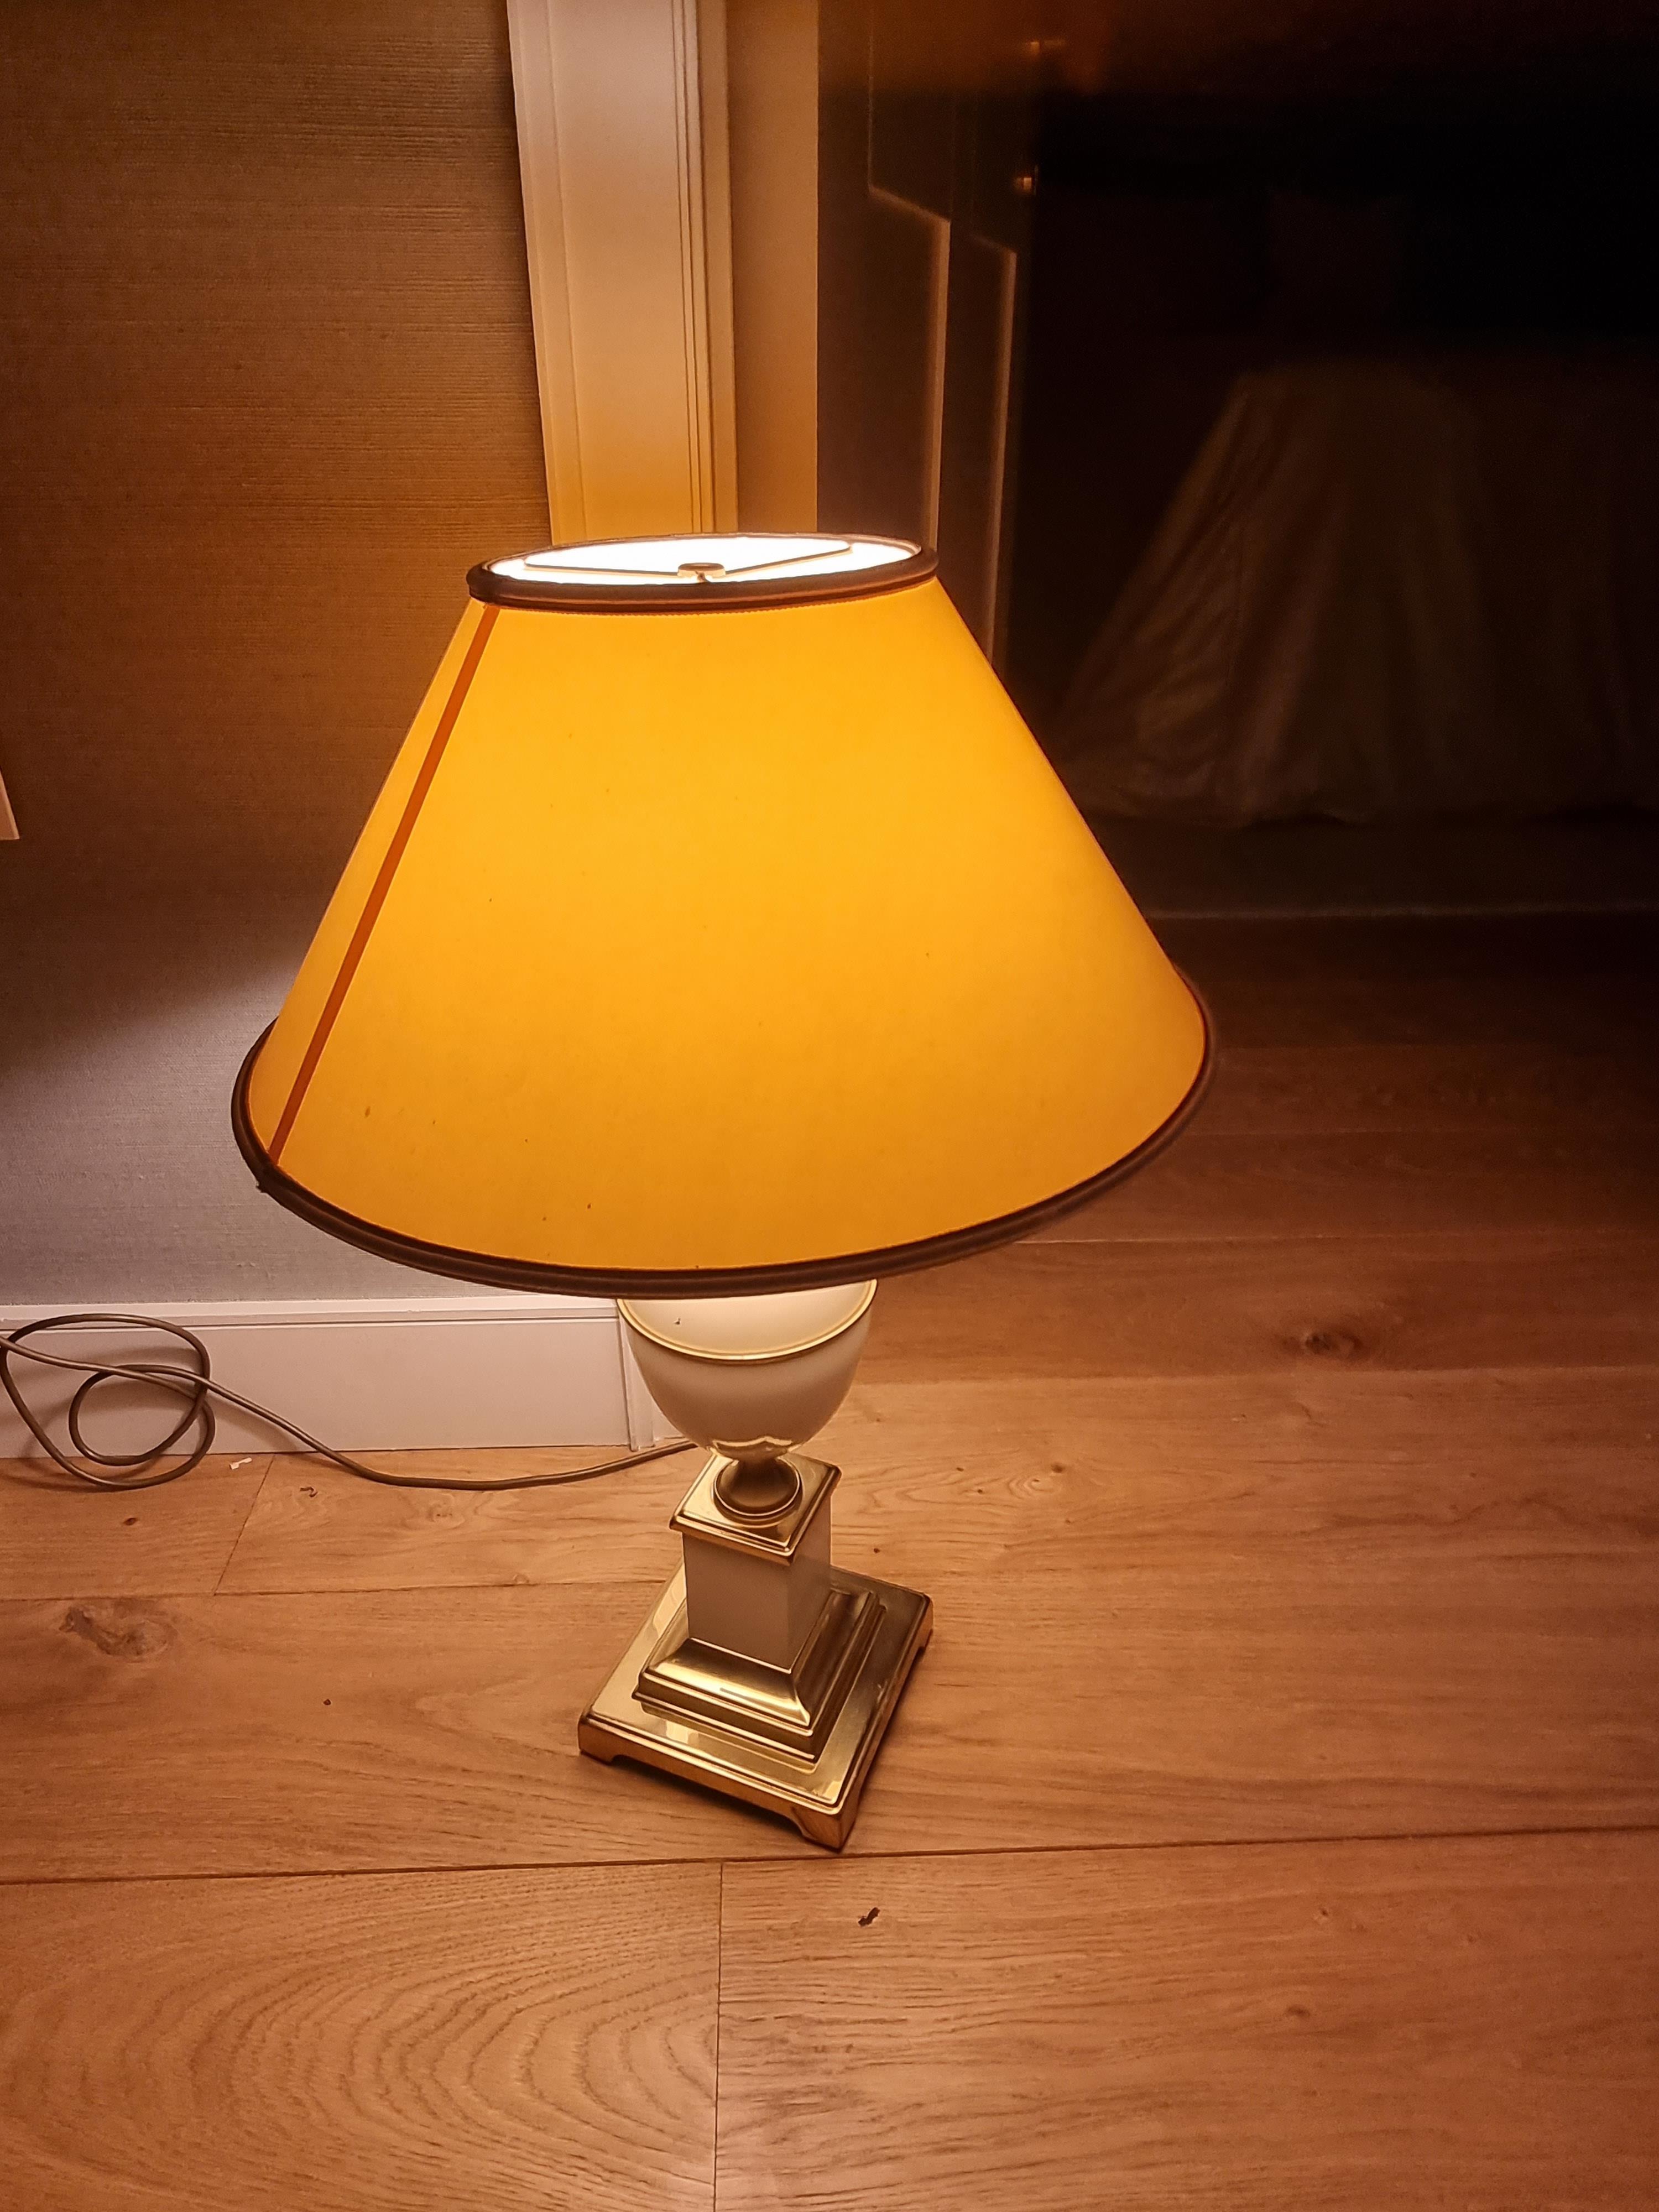 Hollywood Regency Style Egg Enamelled & Brass Table Lamp With Shade. This Stunning Lamp Features A - Image 4 of 4